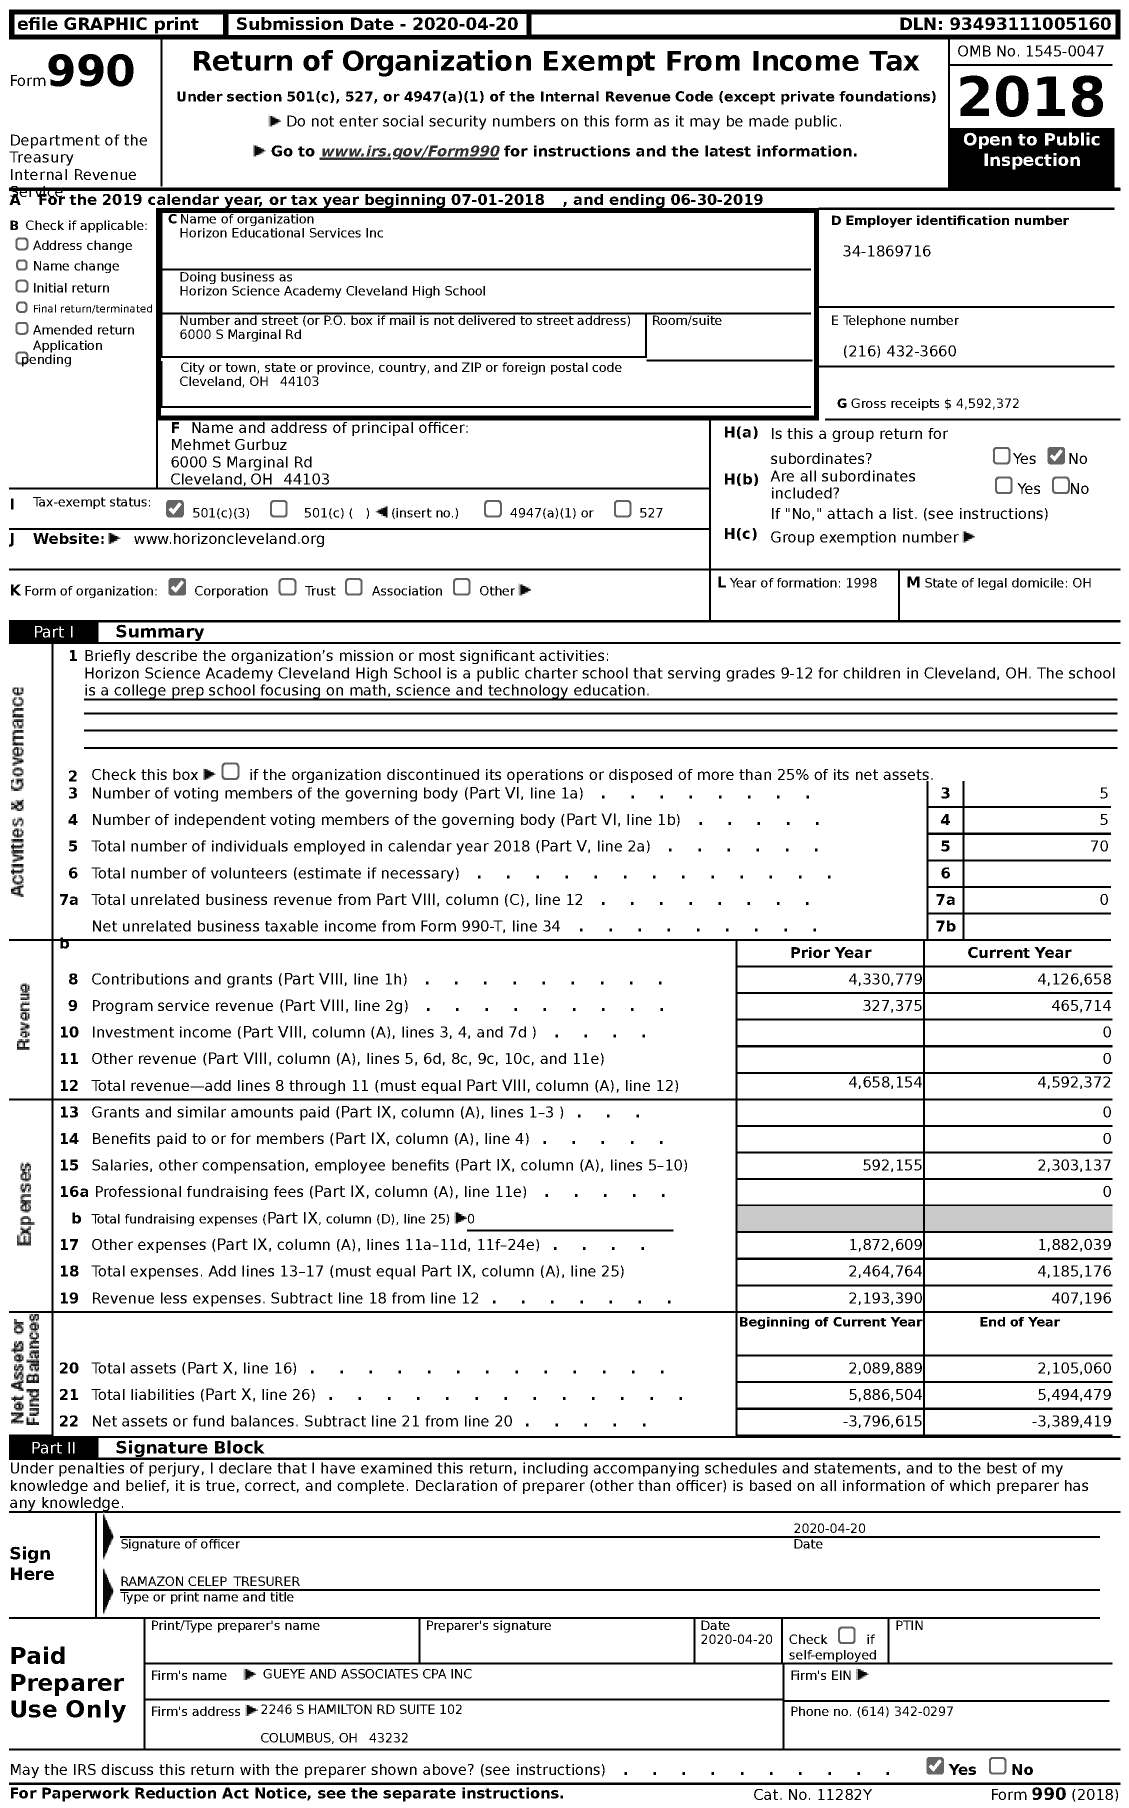 Image of first page of 2018 Form 990 for Horizon Science Academy Cleveland High School